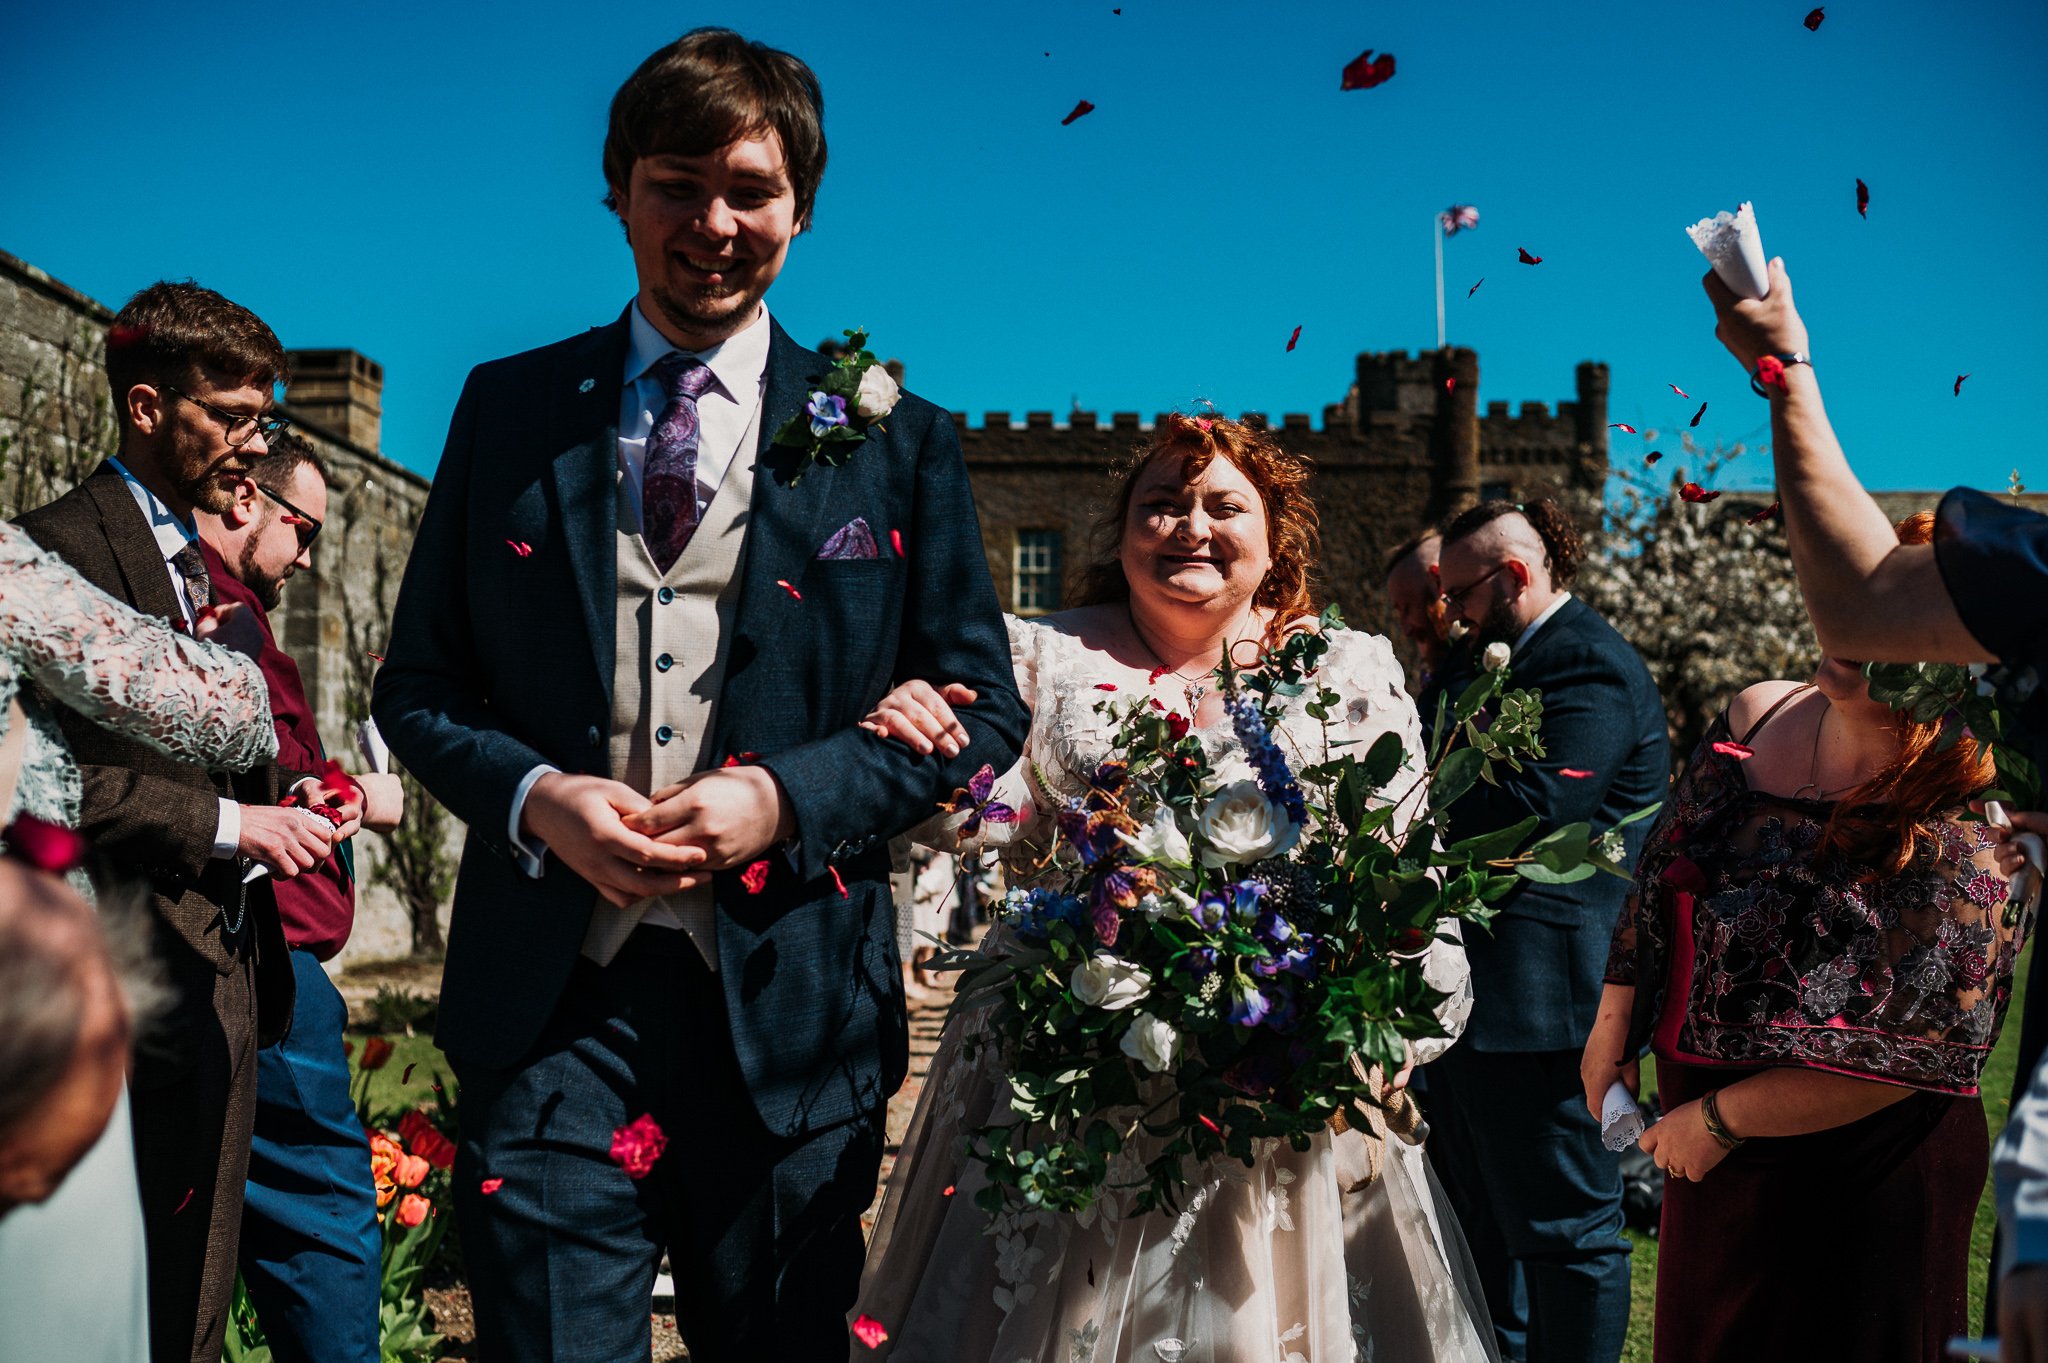 The bride and groom during the confetti line in the gardens at Sneaton Castle, Whitby.